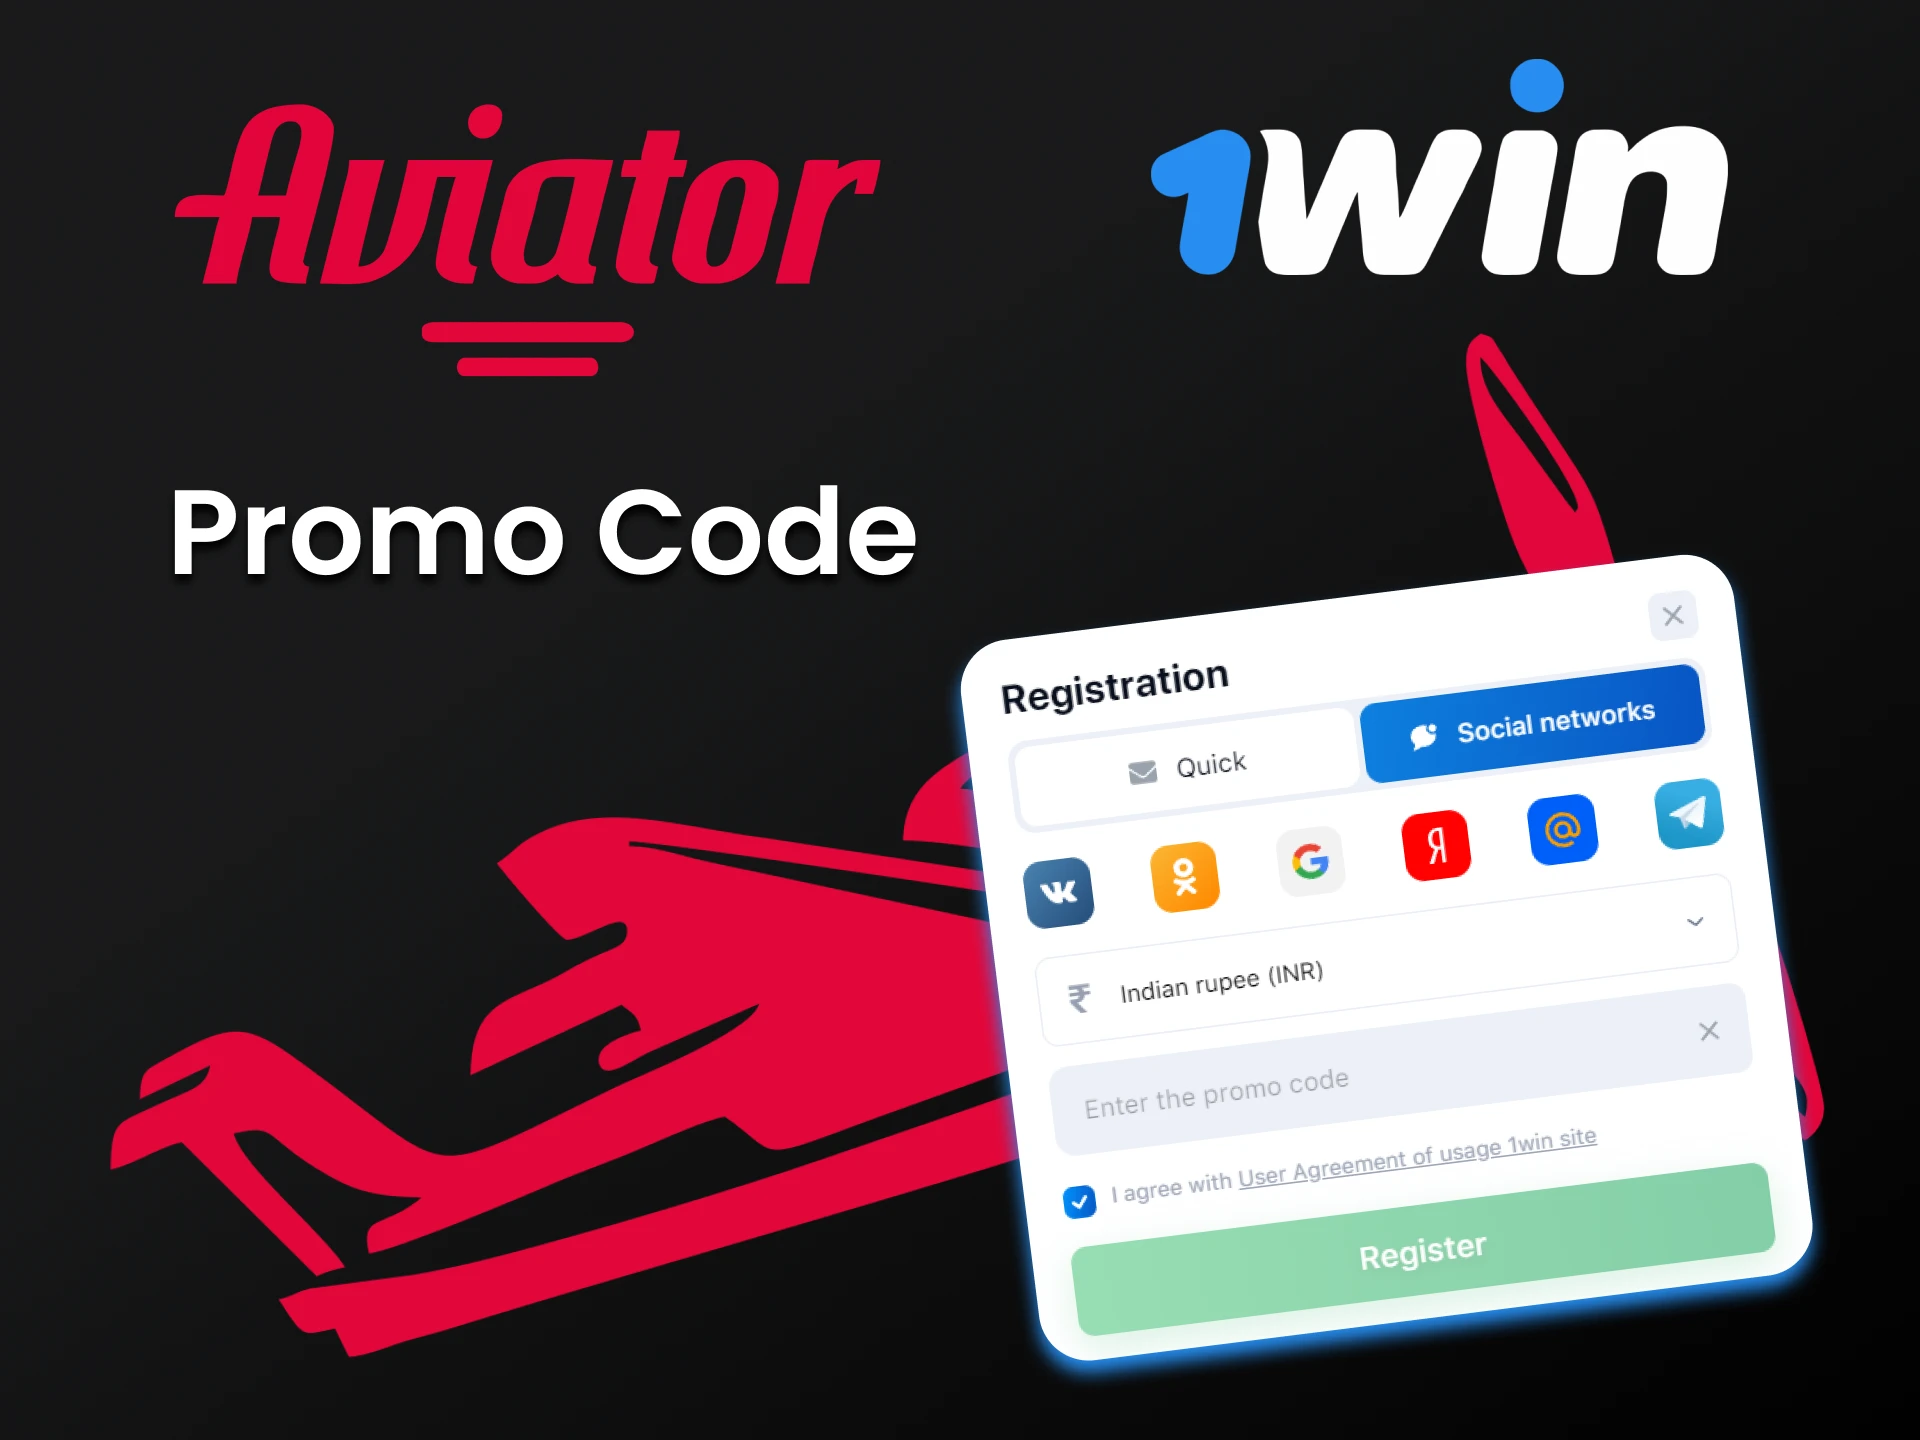 Enter the promo code to receive an additional bonus from 1win.